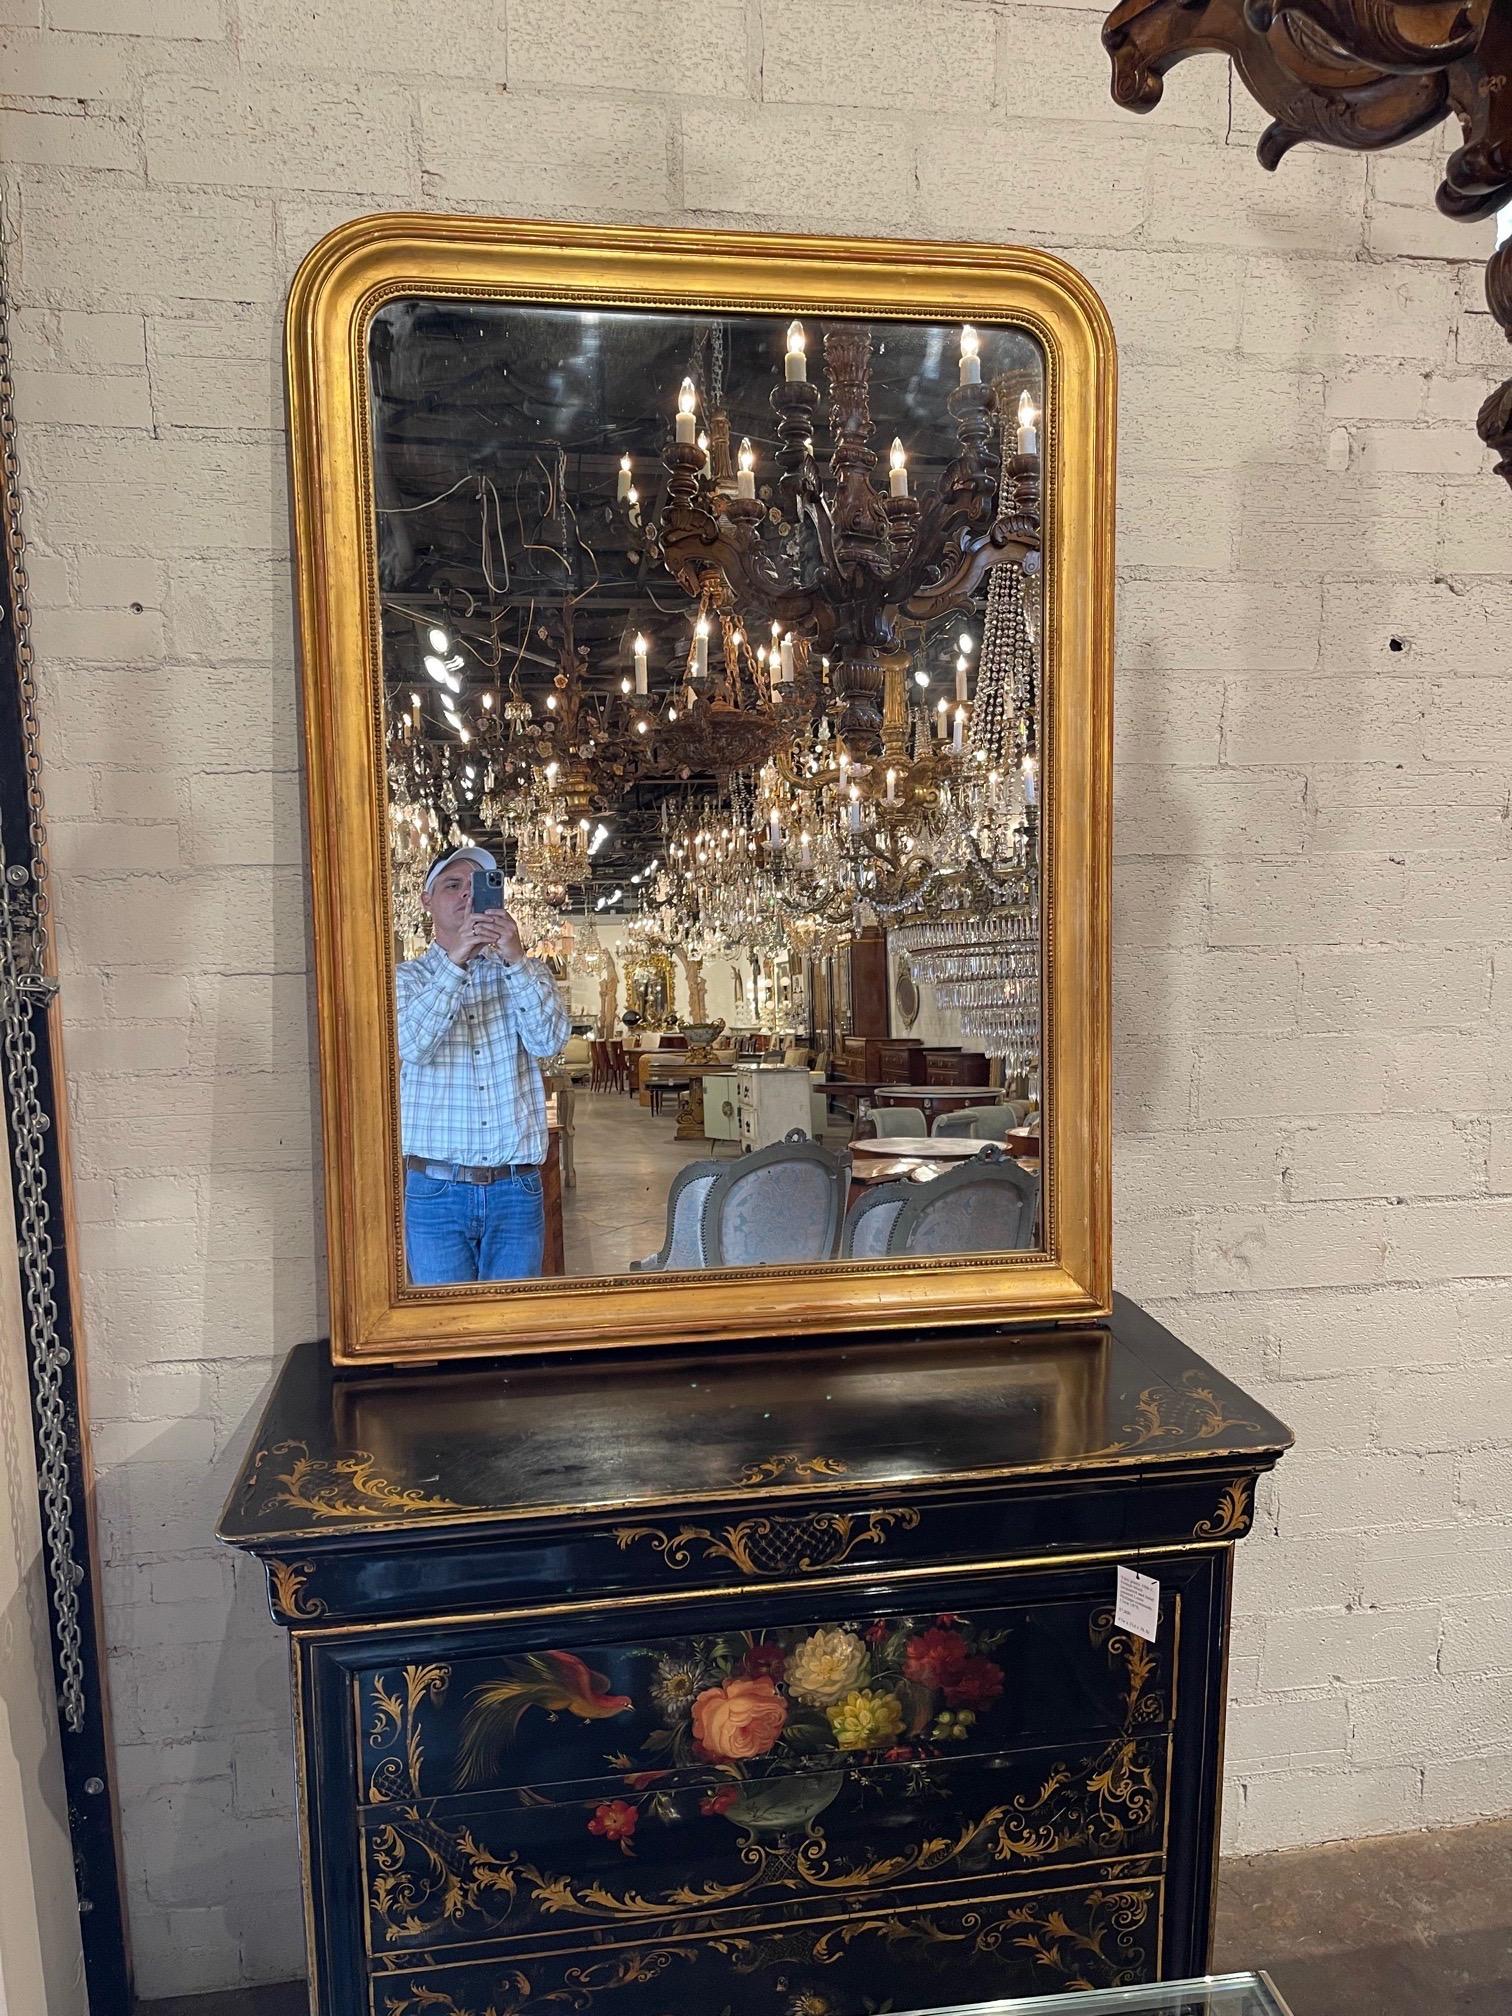 Beautiful 19th century French gold gilt Louis Philippe mirror. A lovely classic that mixes well with a variety of decors!